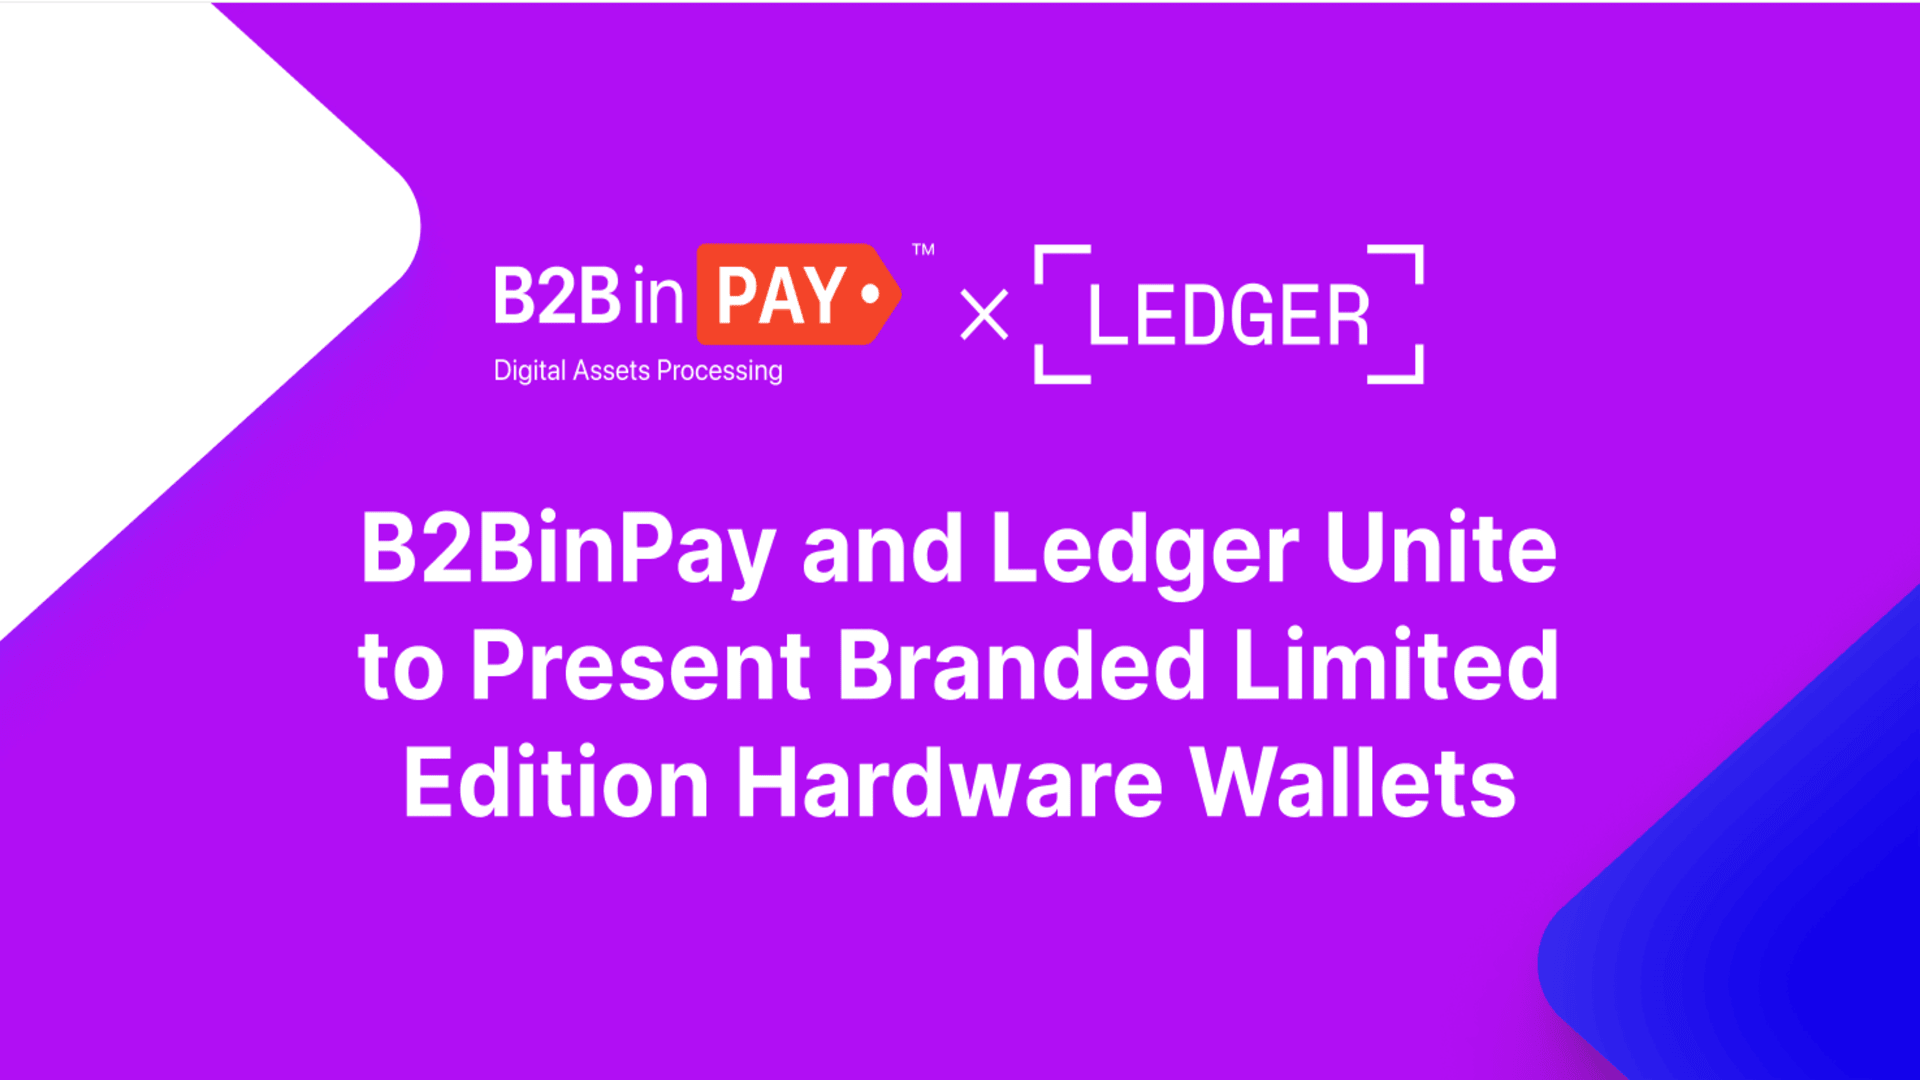 B2BinPay and Ledger Introduce Limited Edition Hardware Wallets with Branded Design